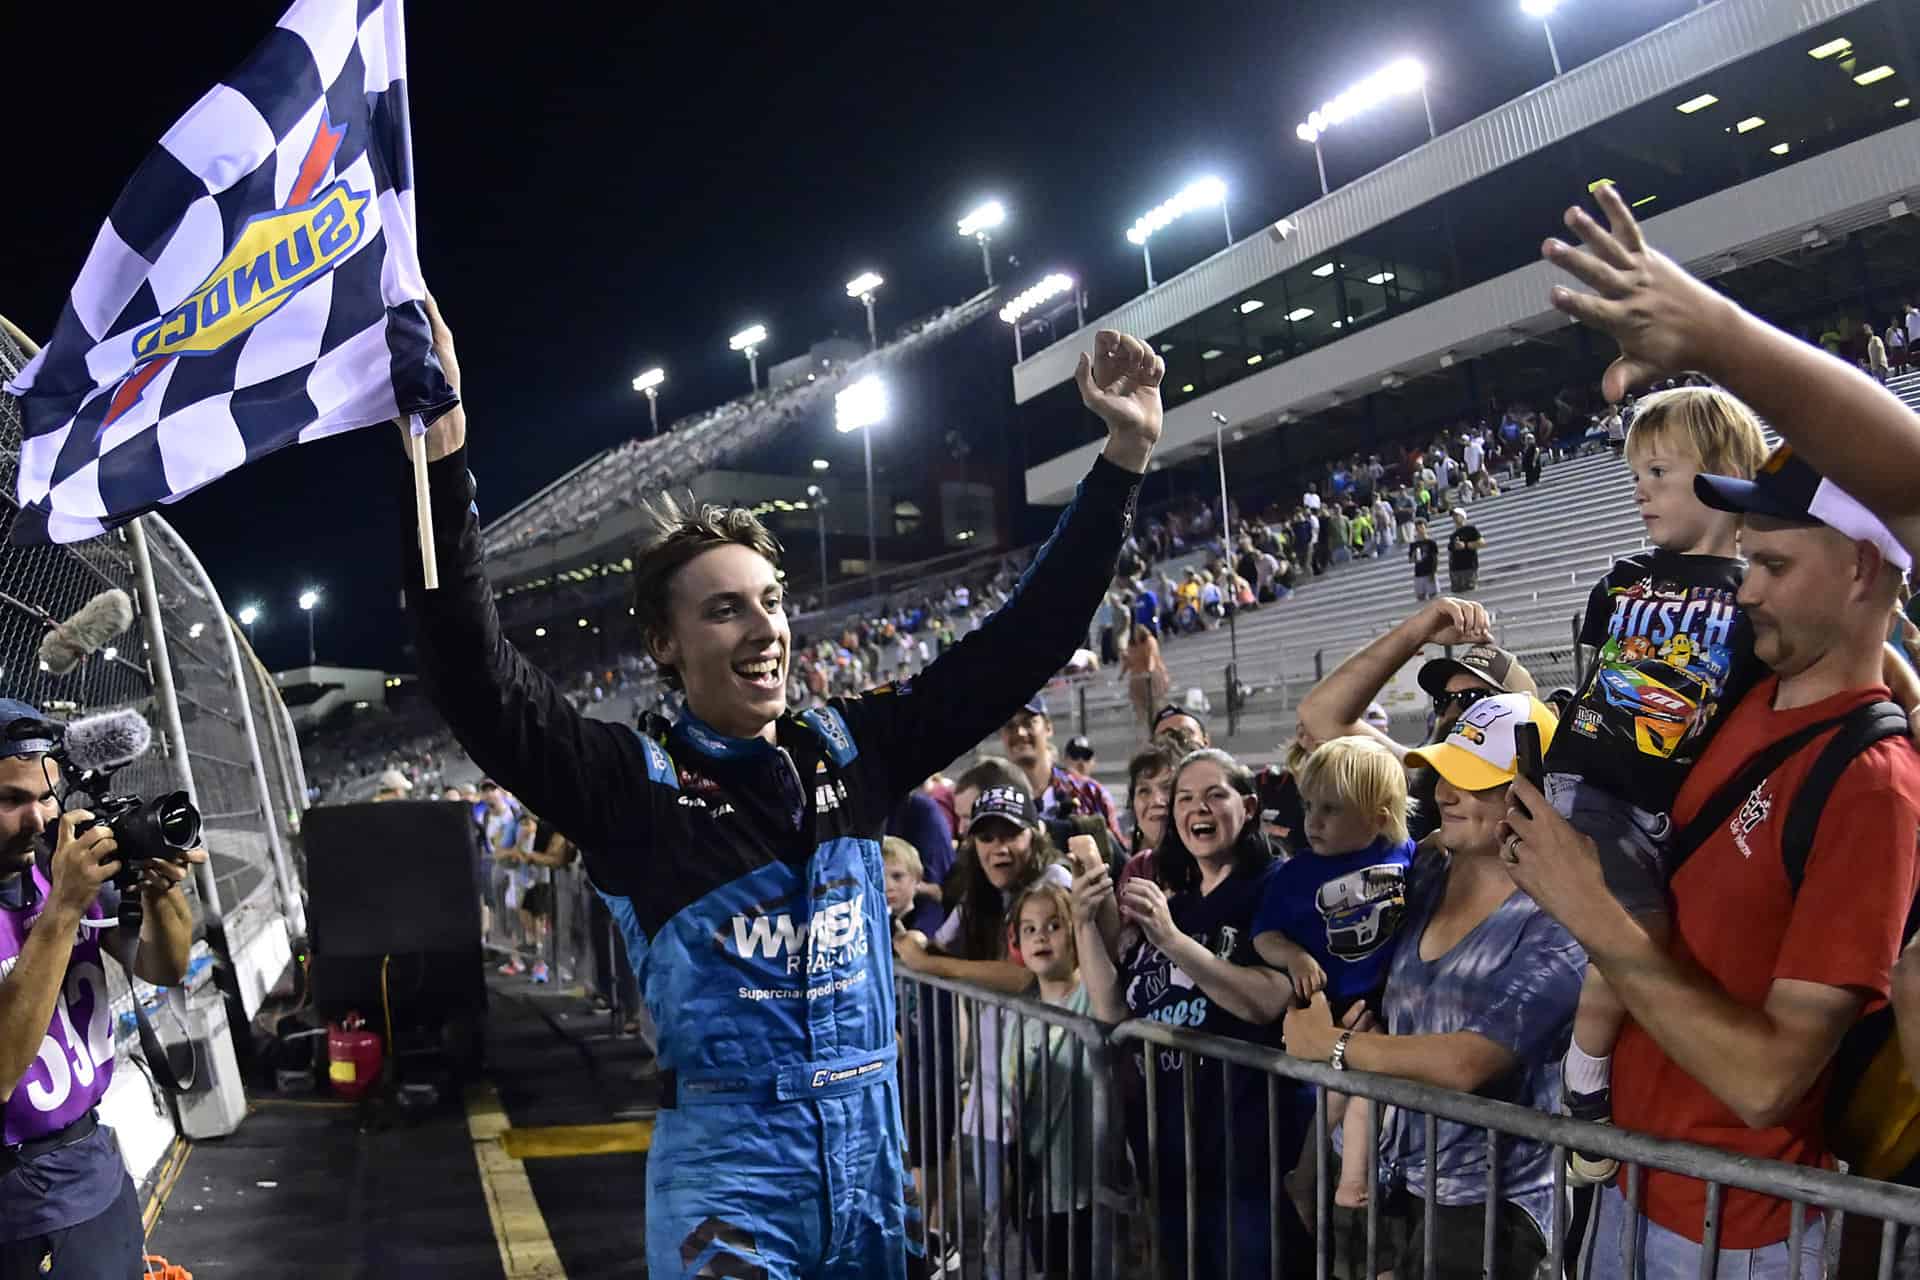 Carson Hocevar took over the flag stand at Richmond Raceway to celebrate his NASCAR Craftsman Truck Series victory with the fans.